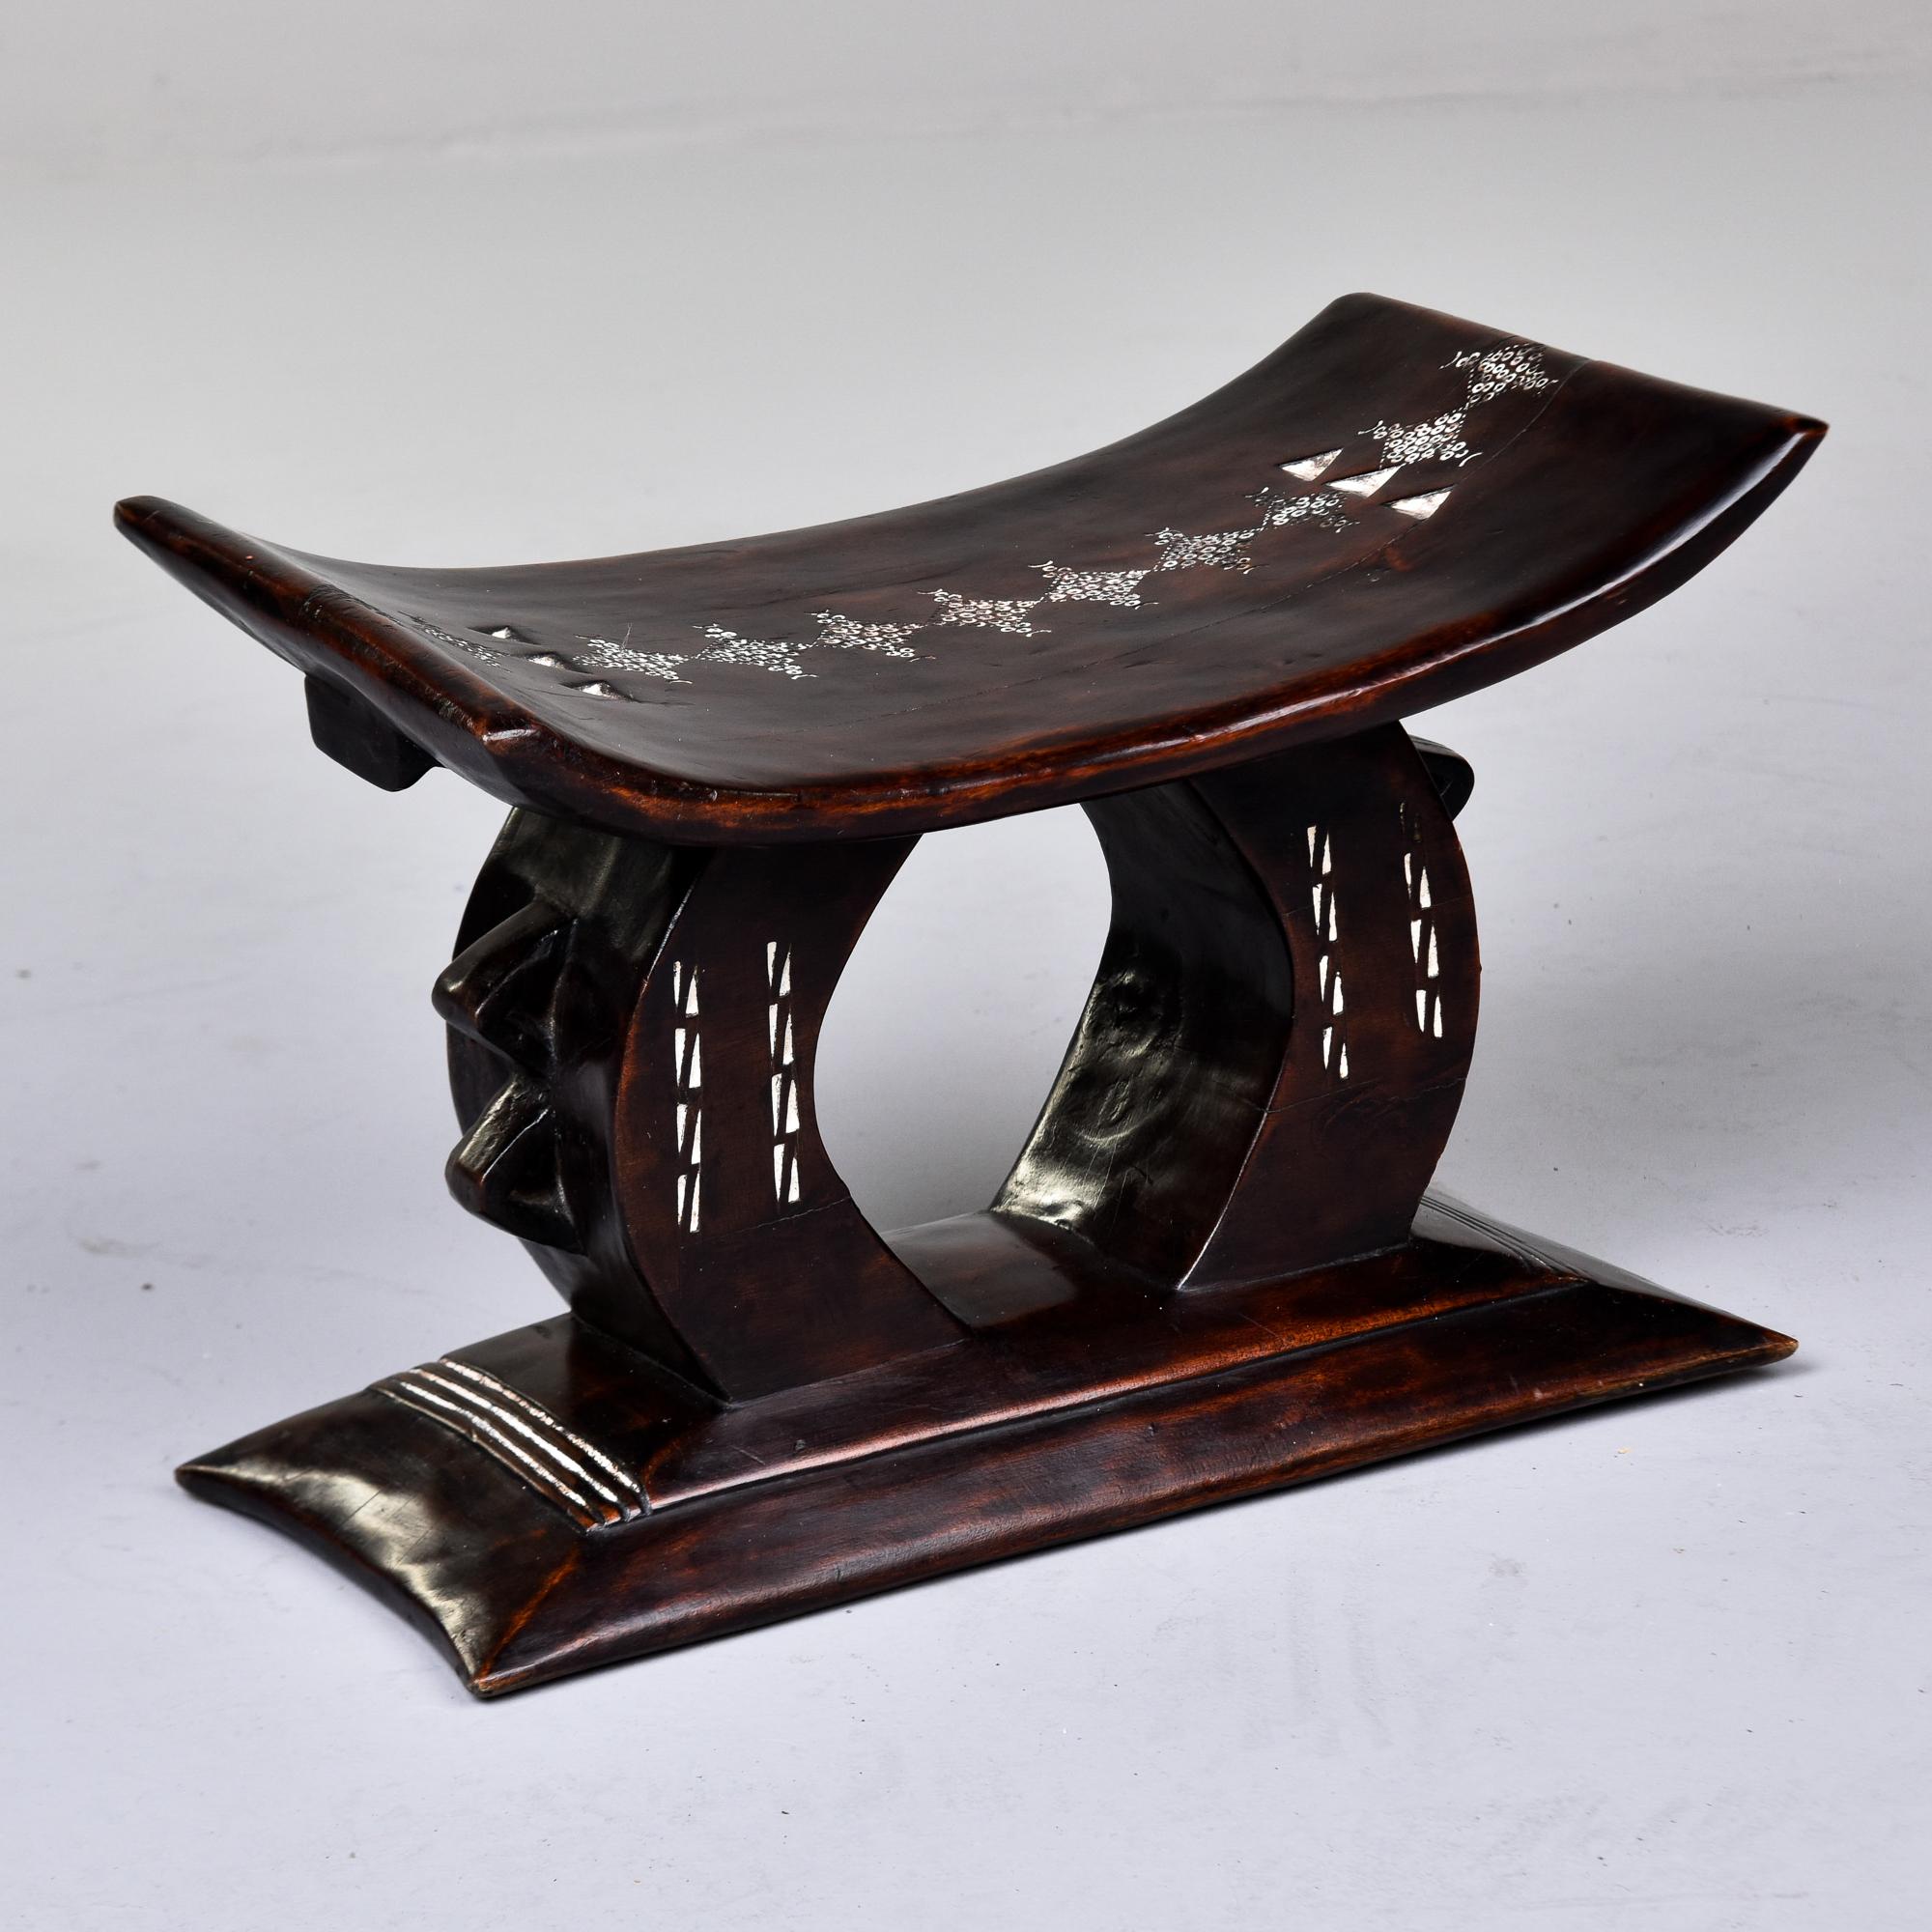 Found in Ghana, this Ashanti carved stool dates from the 1980s. Hand carved and crafted from a single piece of wood, this stool has white painted and etched detailed design on the seat and base. Unknown wood type is dense and sturdy with a dark